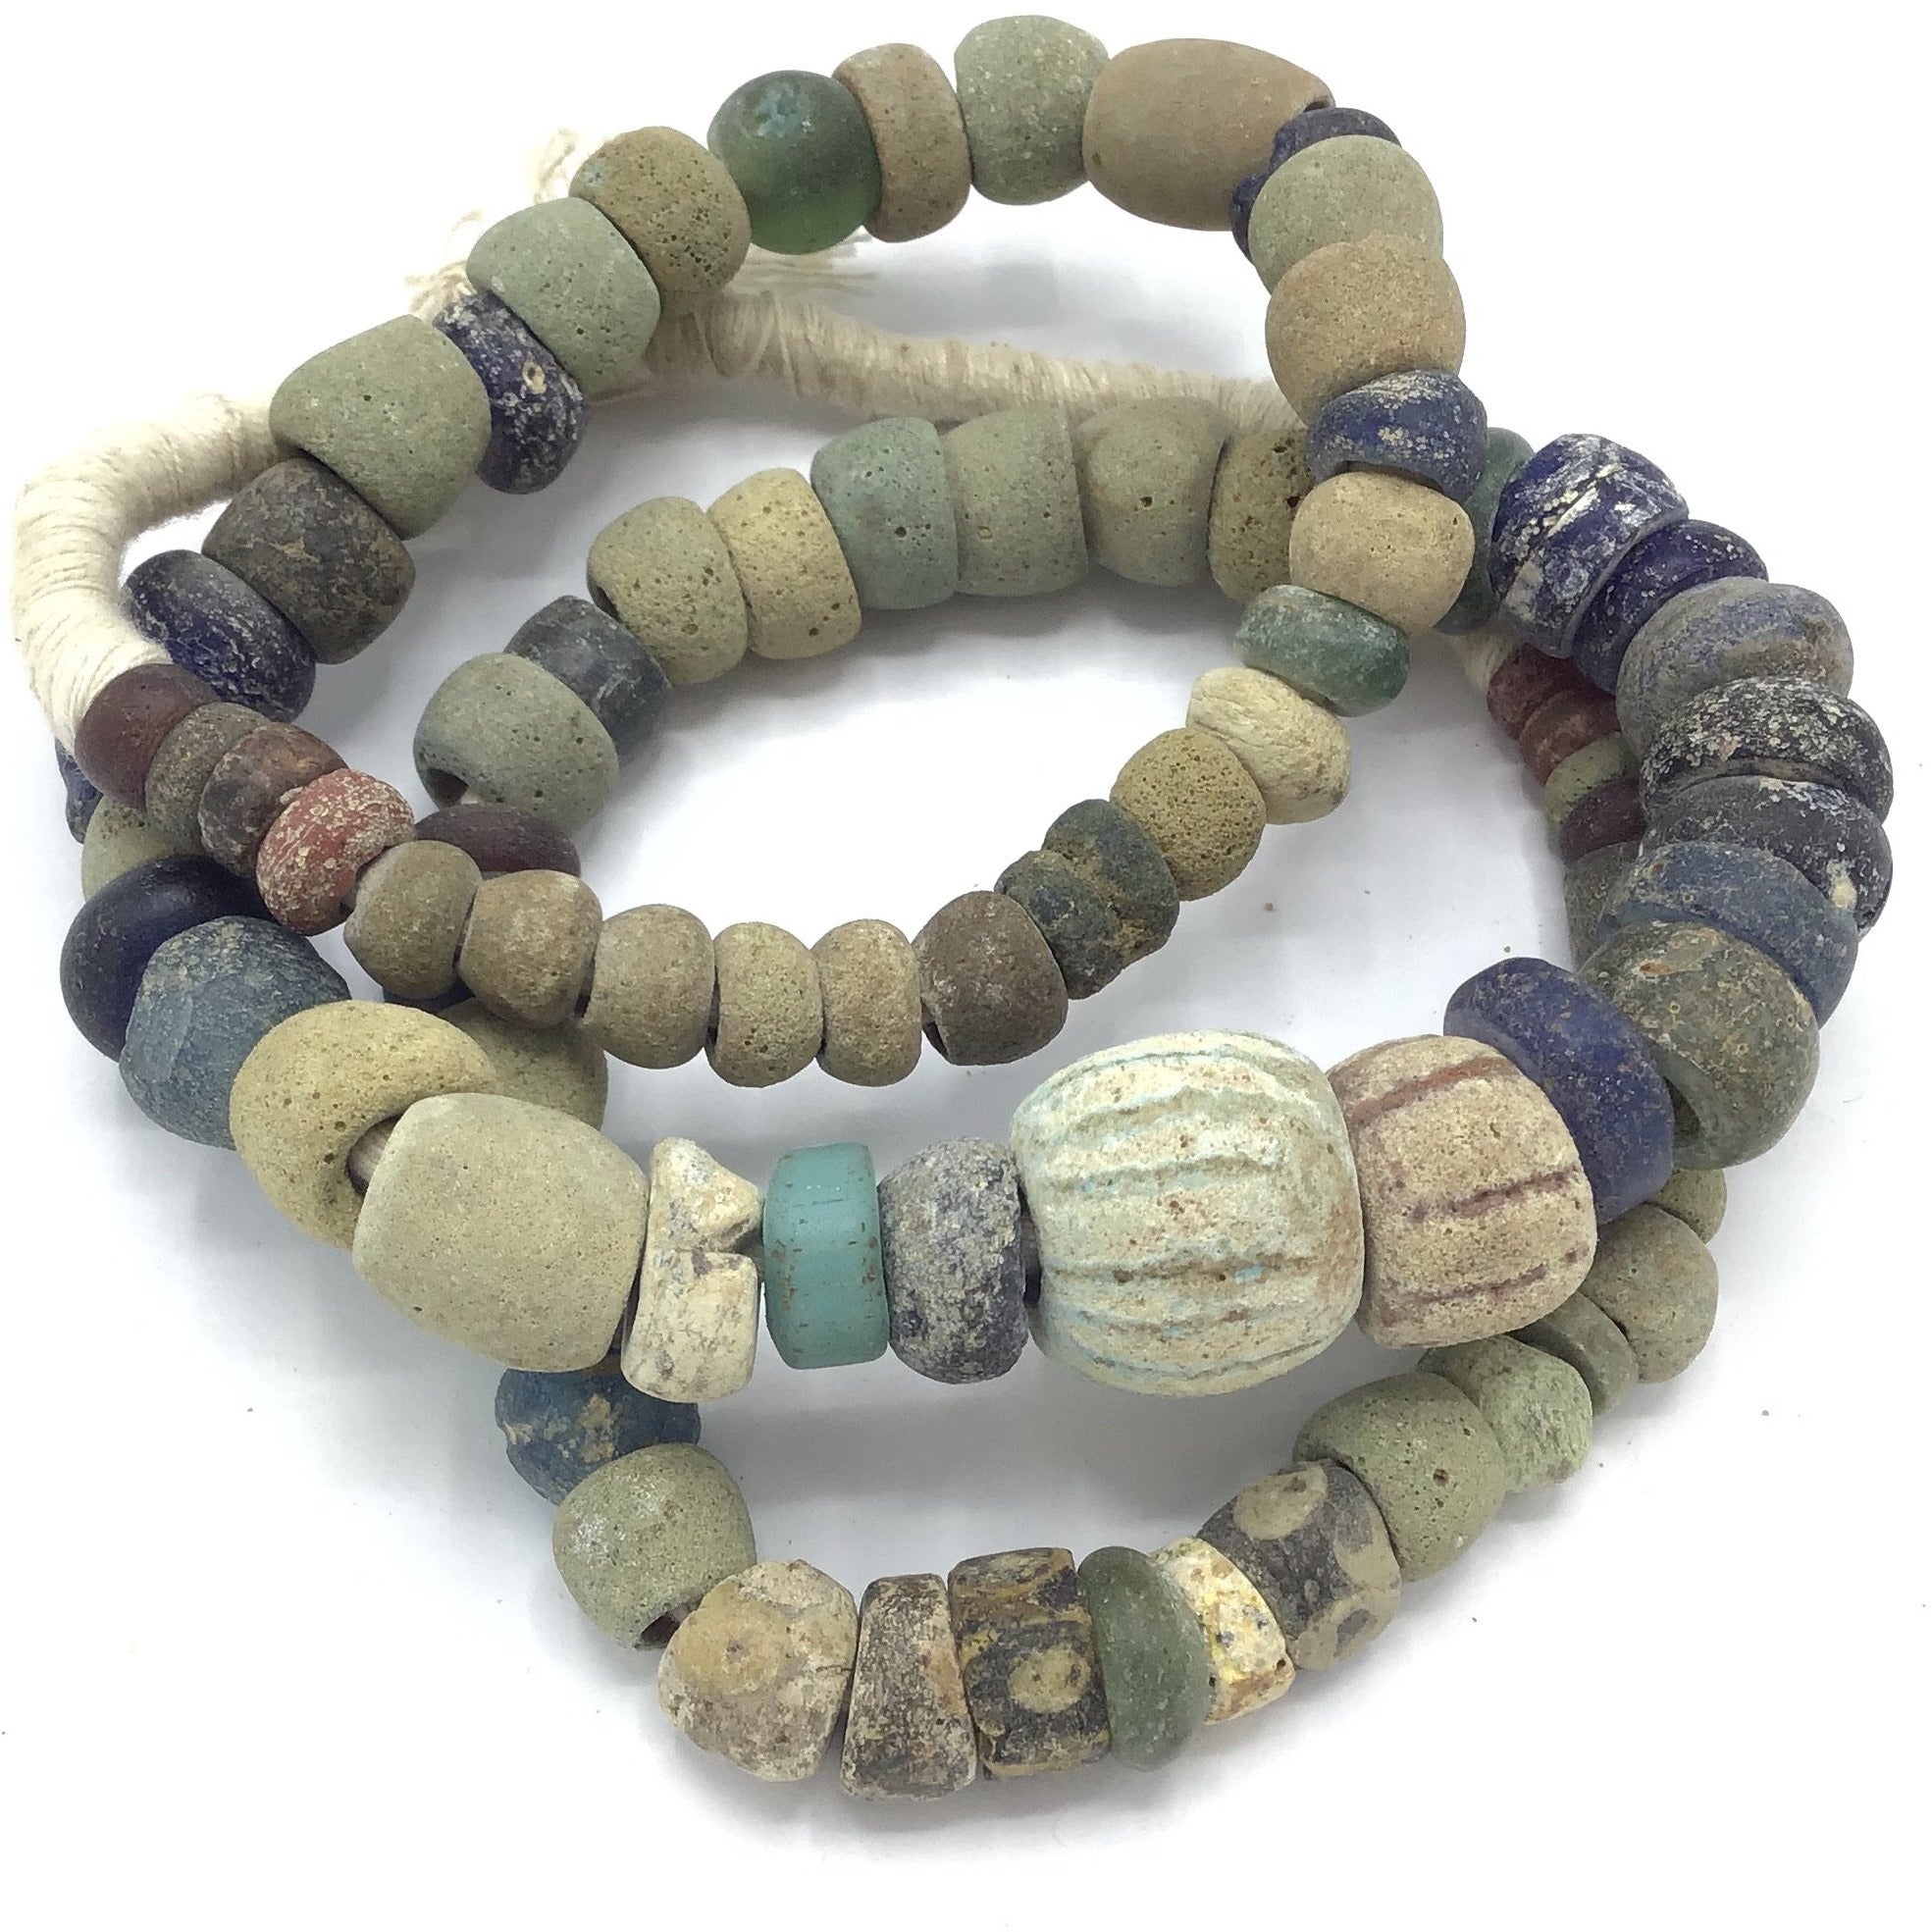 Antique Faience and Clay Beads with Some Islamic Glass Beads